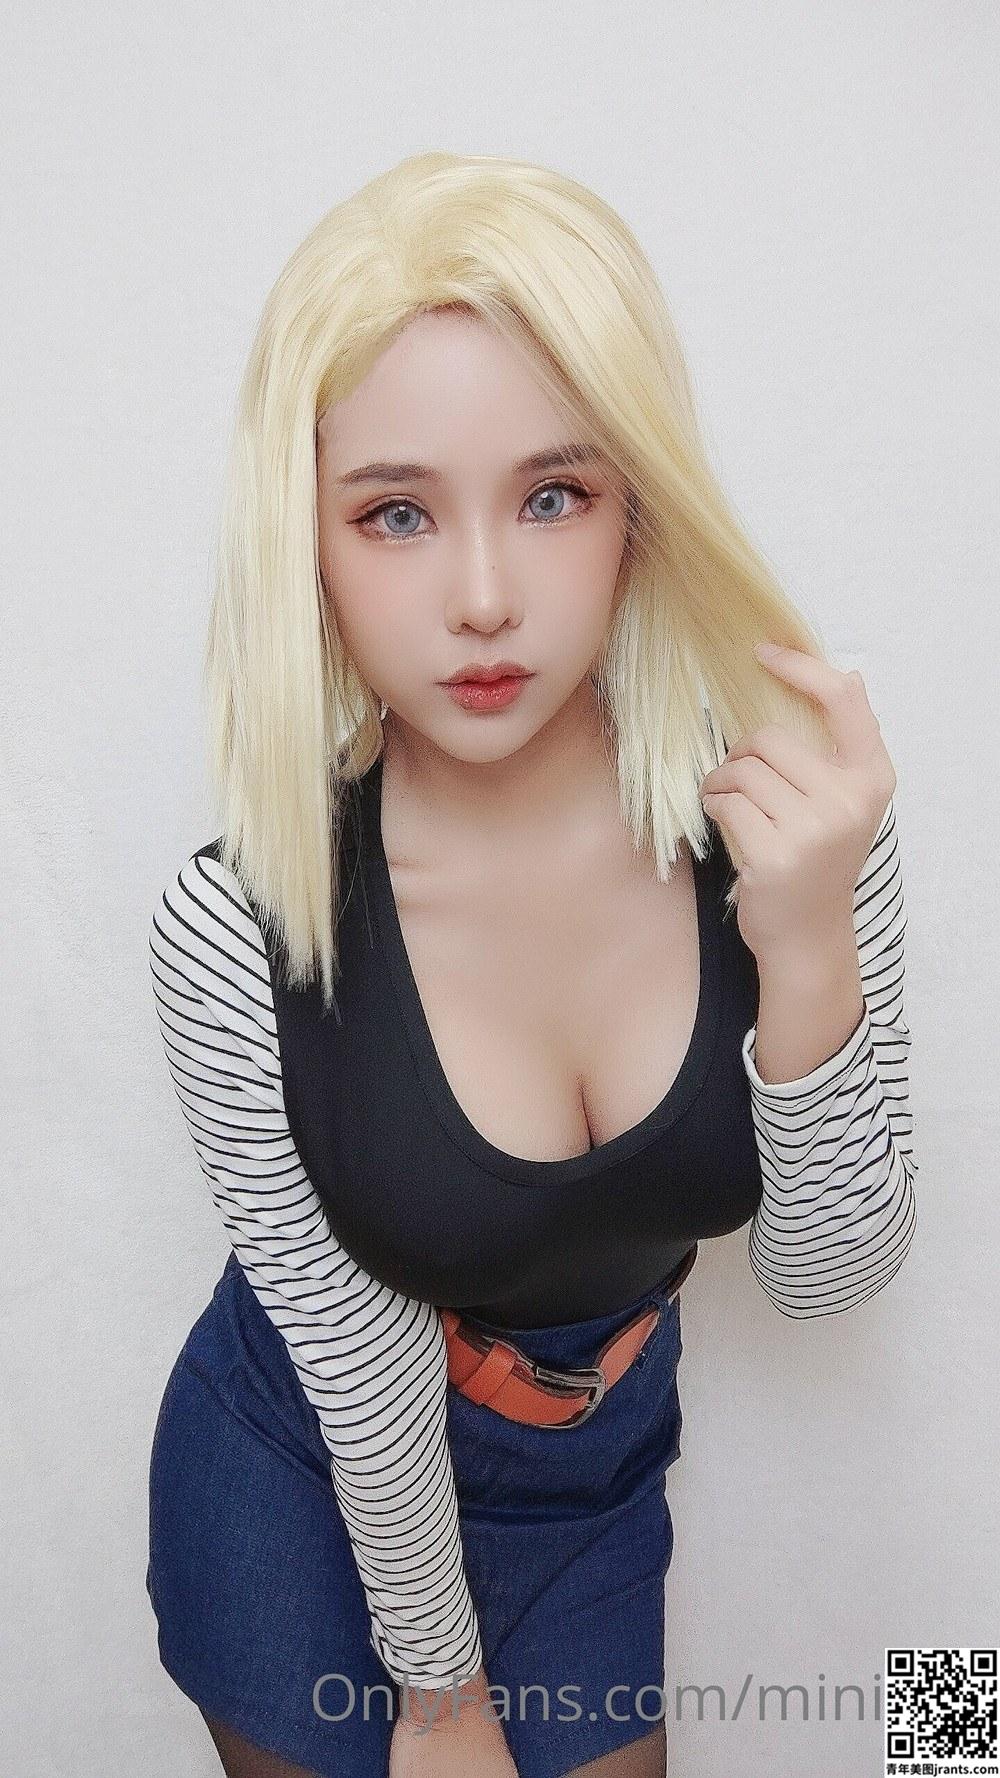 Minichu &#8211; Android 18